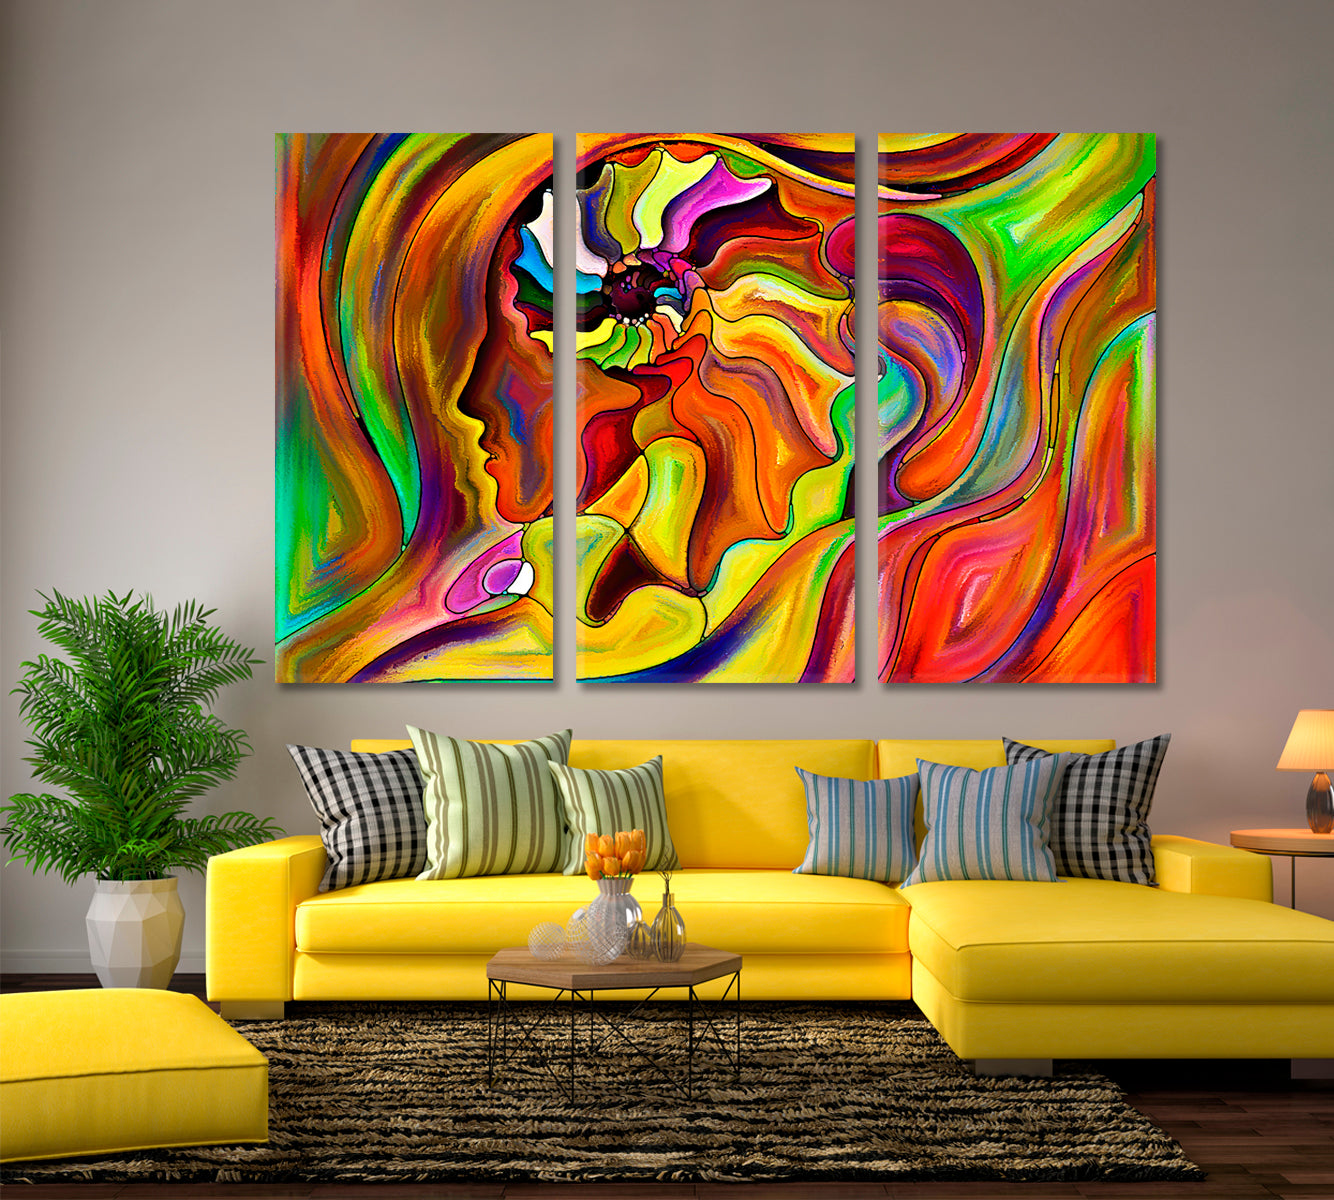 Life Forms And Lines Abstract Design Abstract Art Print Artesty 3 panels 36" x 24" 